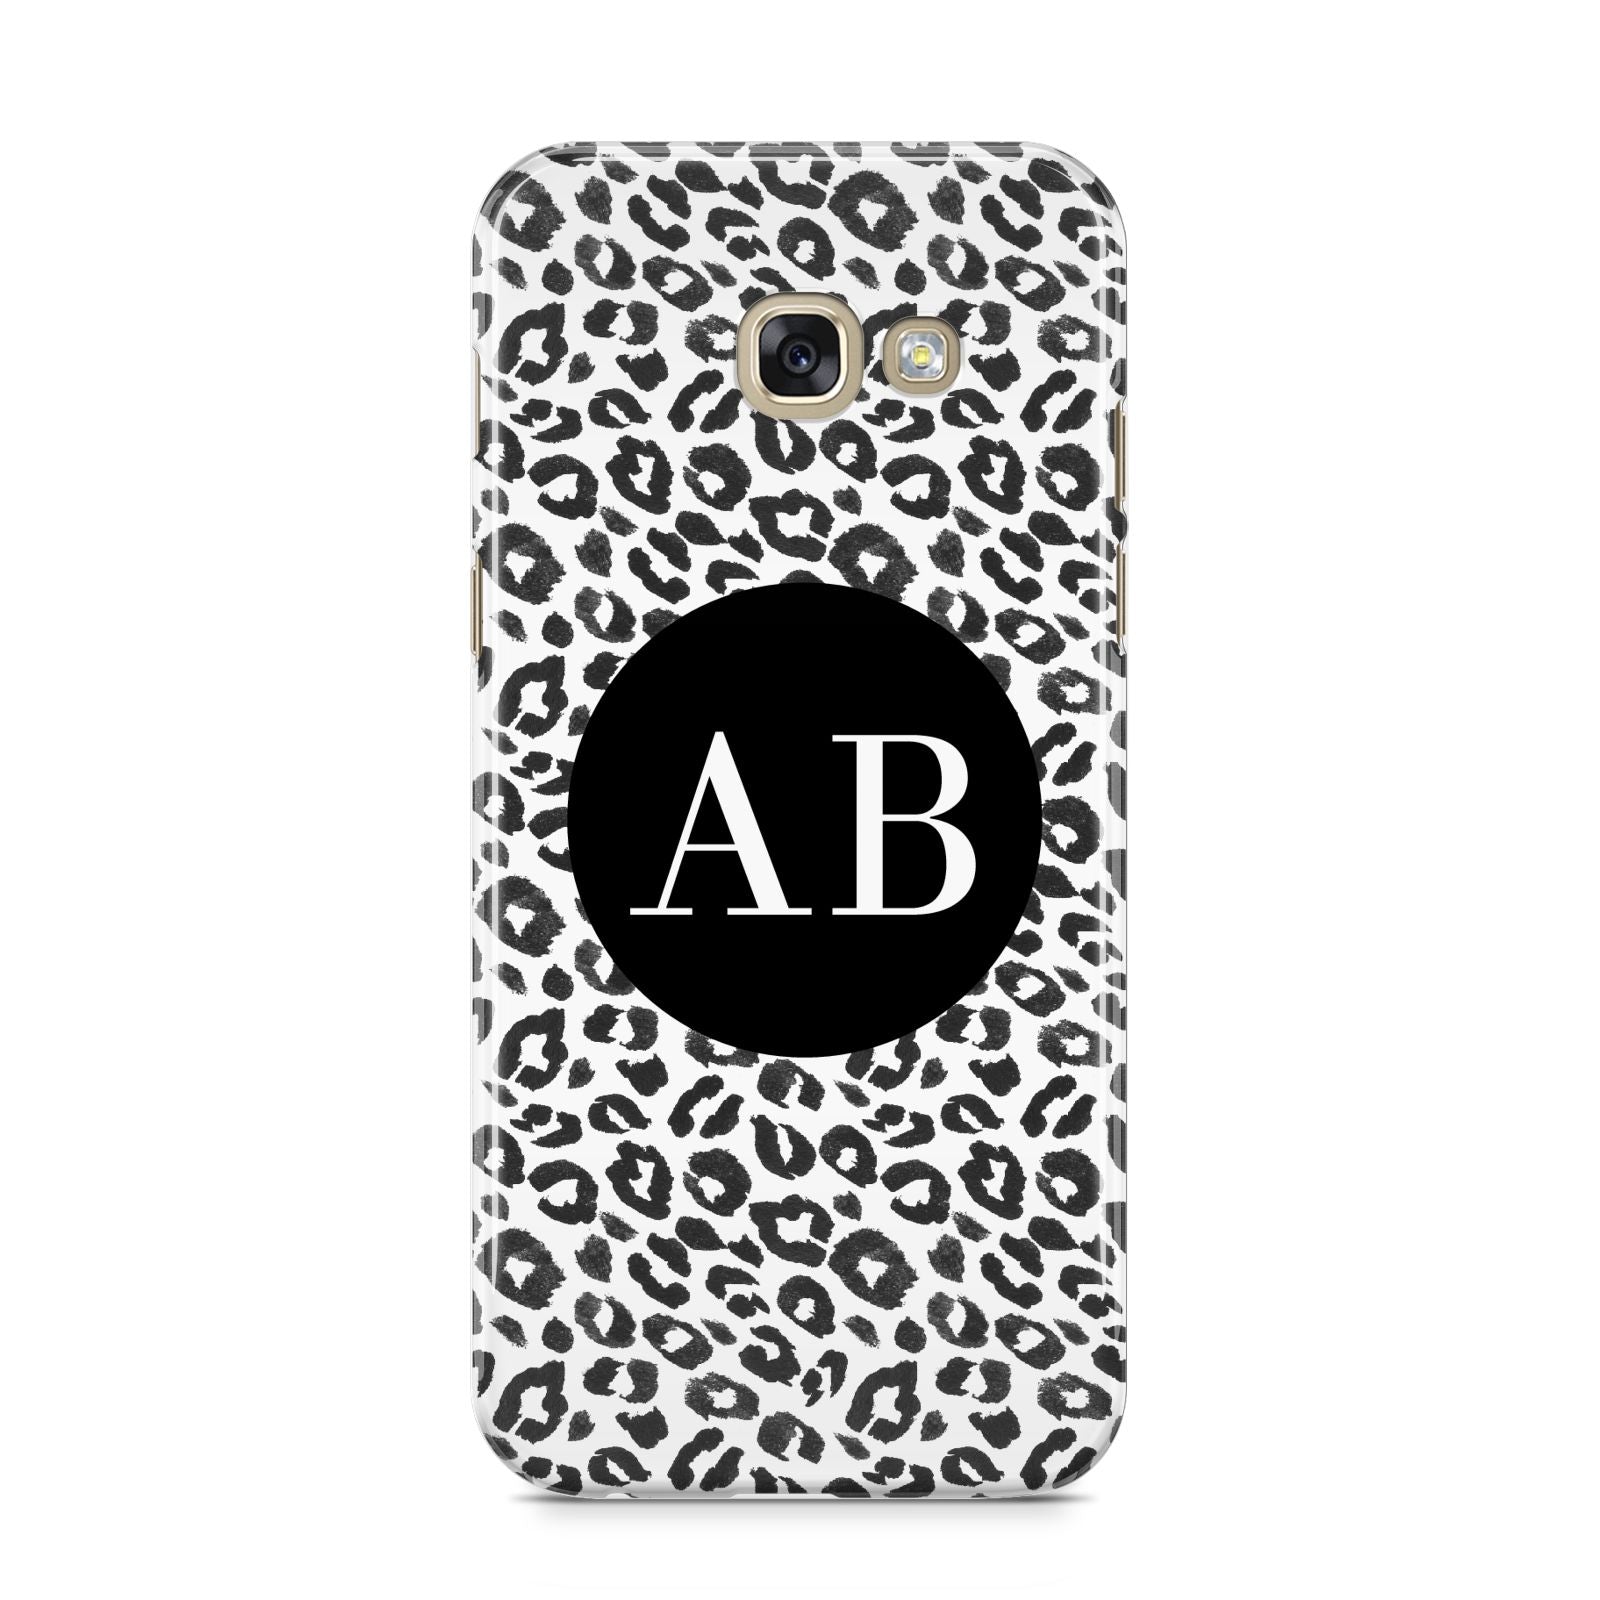 Leopard Print Black and White Samsung Galaxy A5 2017 Case on gold phone